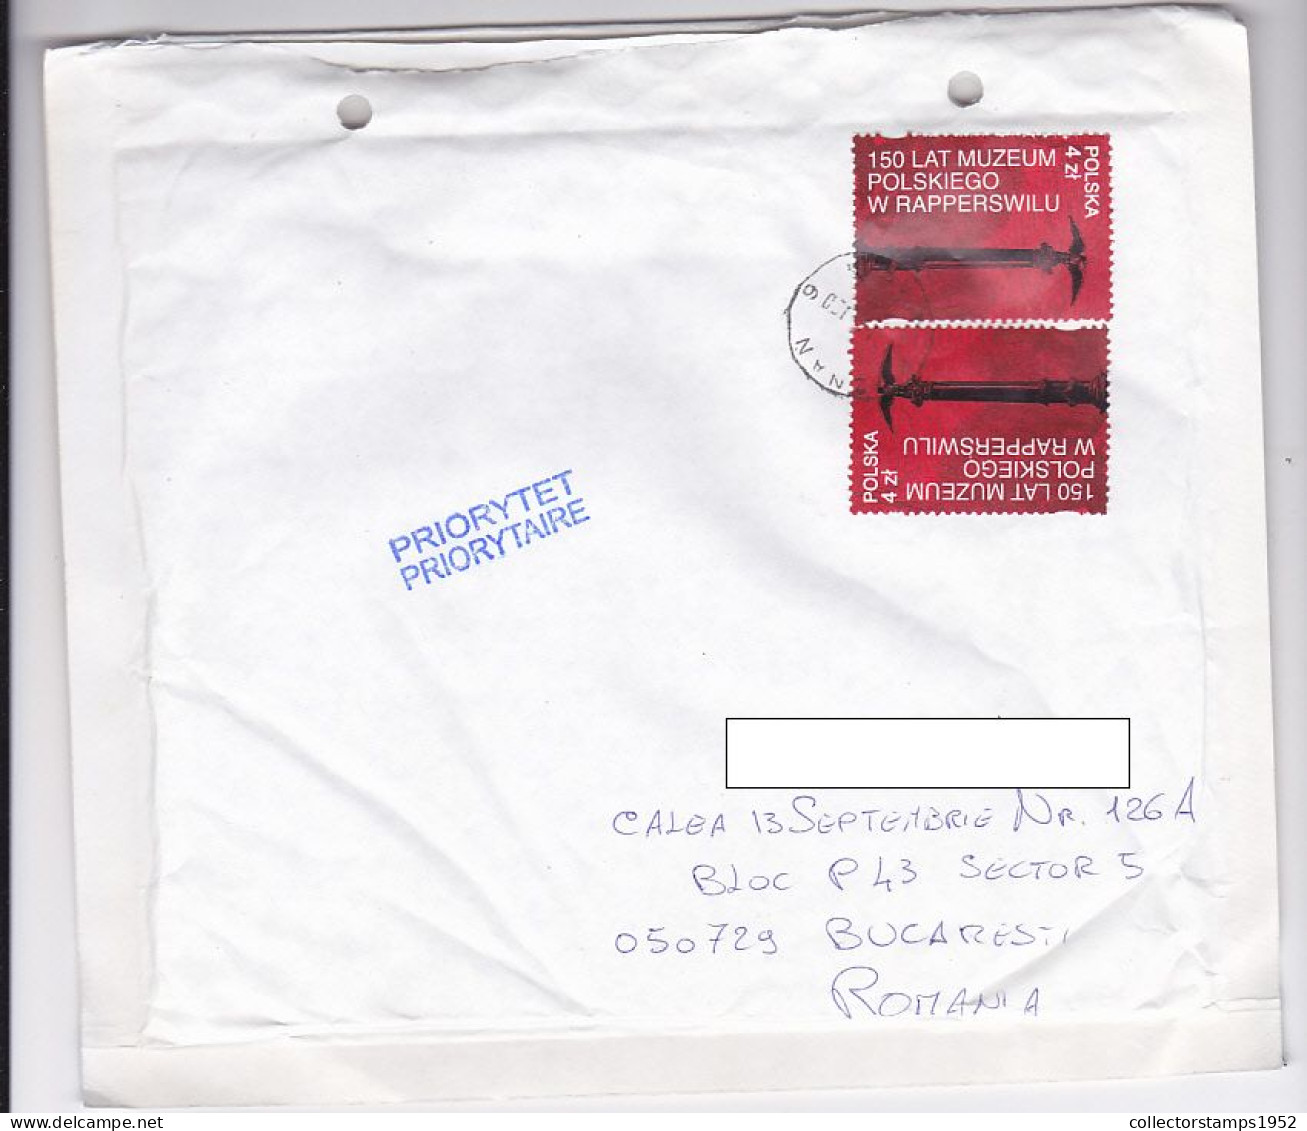 MUSEUM, FINE STAMP ON COVER, 2020, POLAND - Lettres & Documents